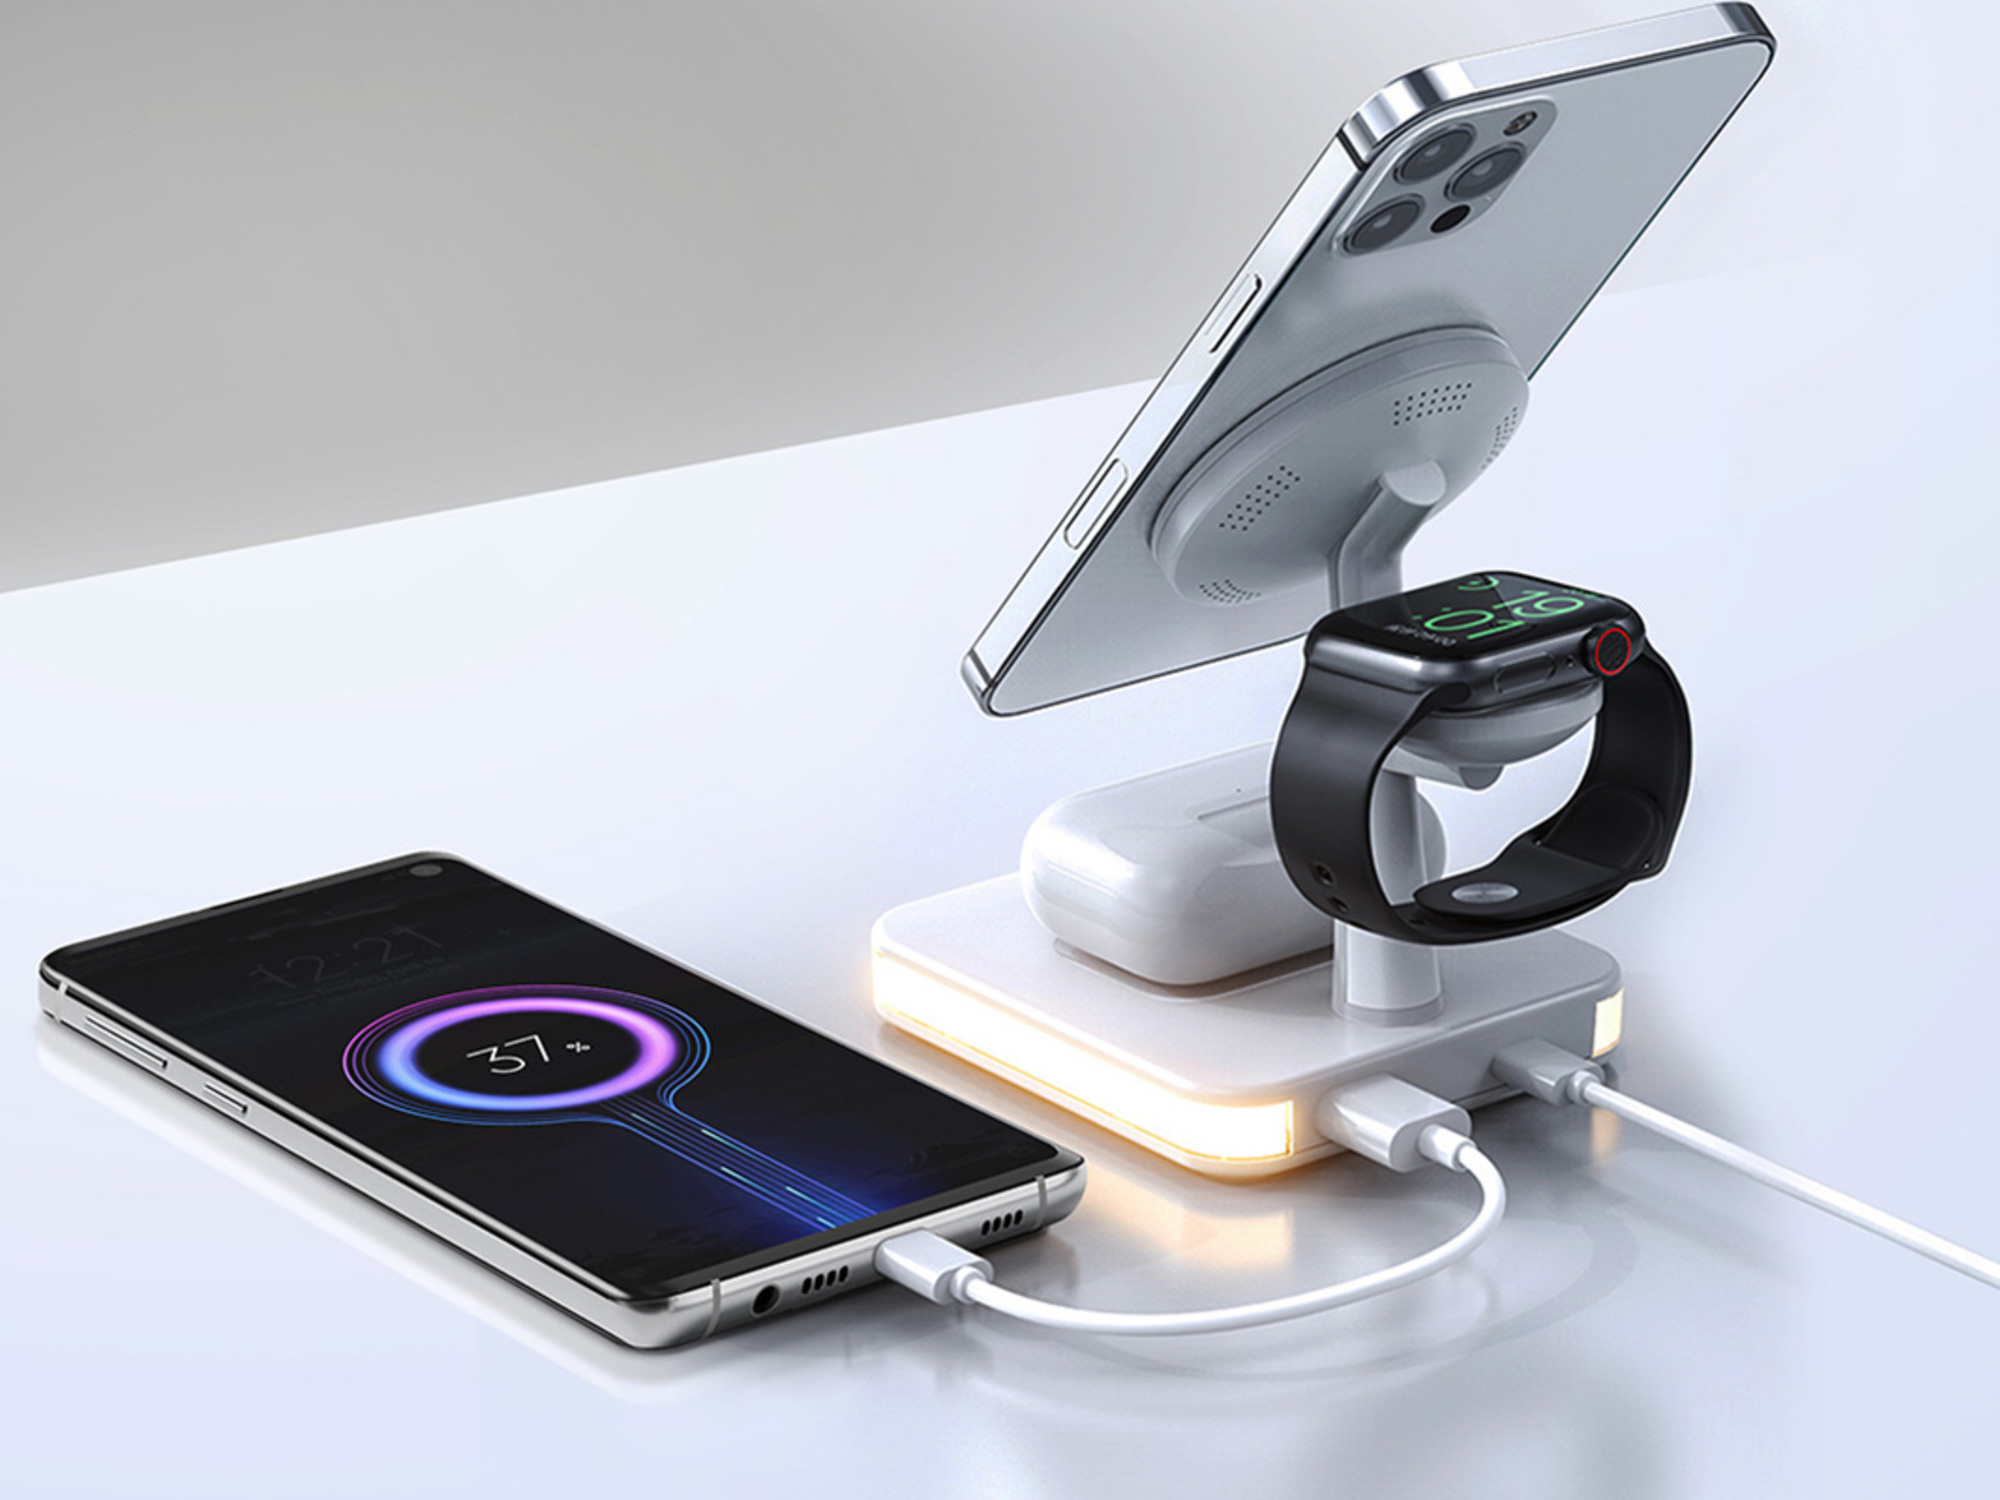 Reduce clutter on your nightstand with this 6-in-1 wireless charging station